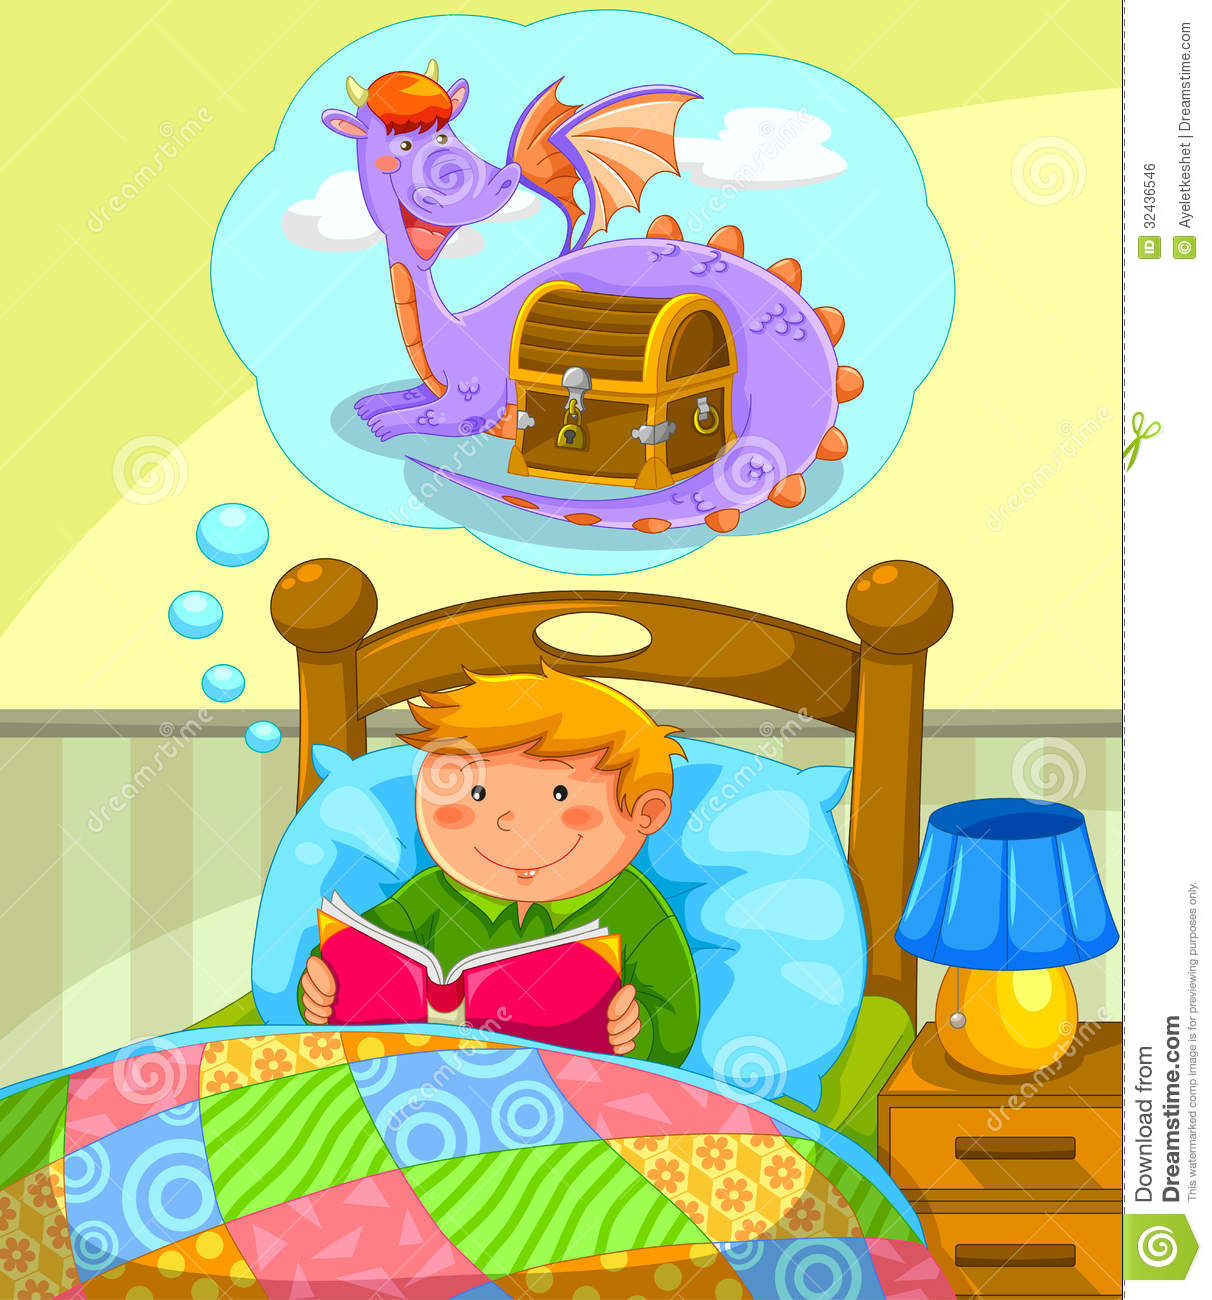 Reading In Bed Royalty Free Stock Image   Image  32436546